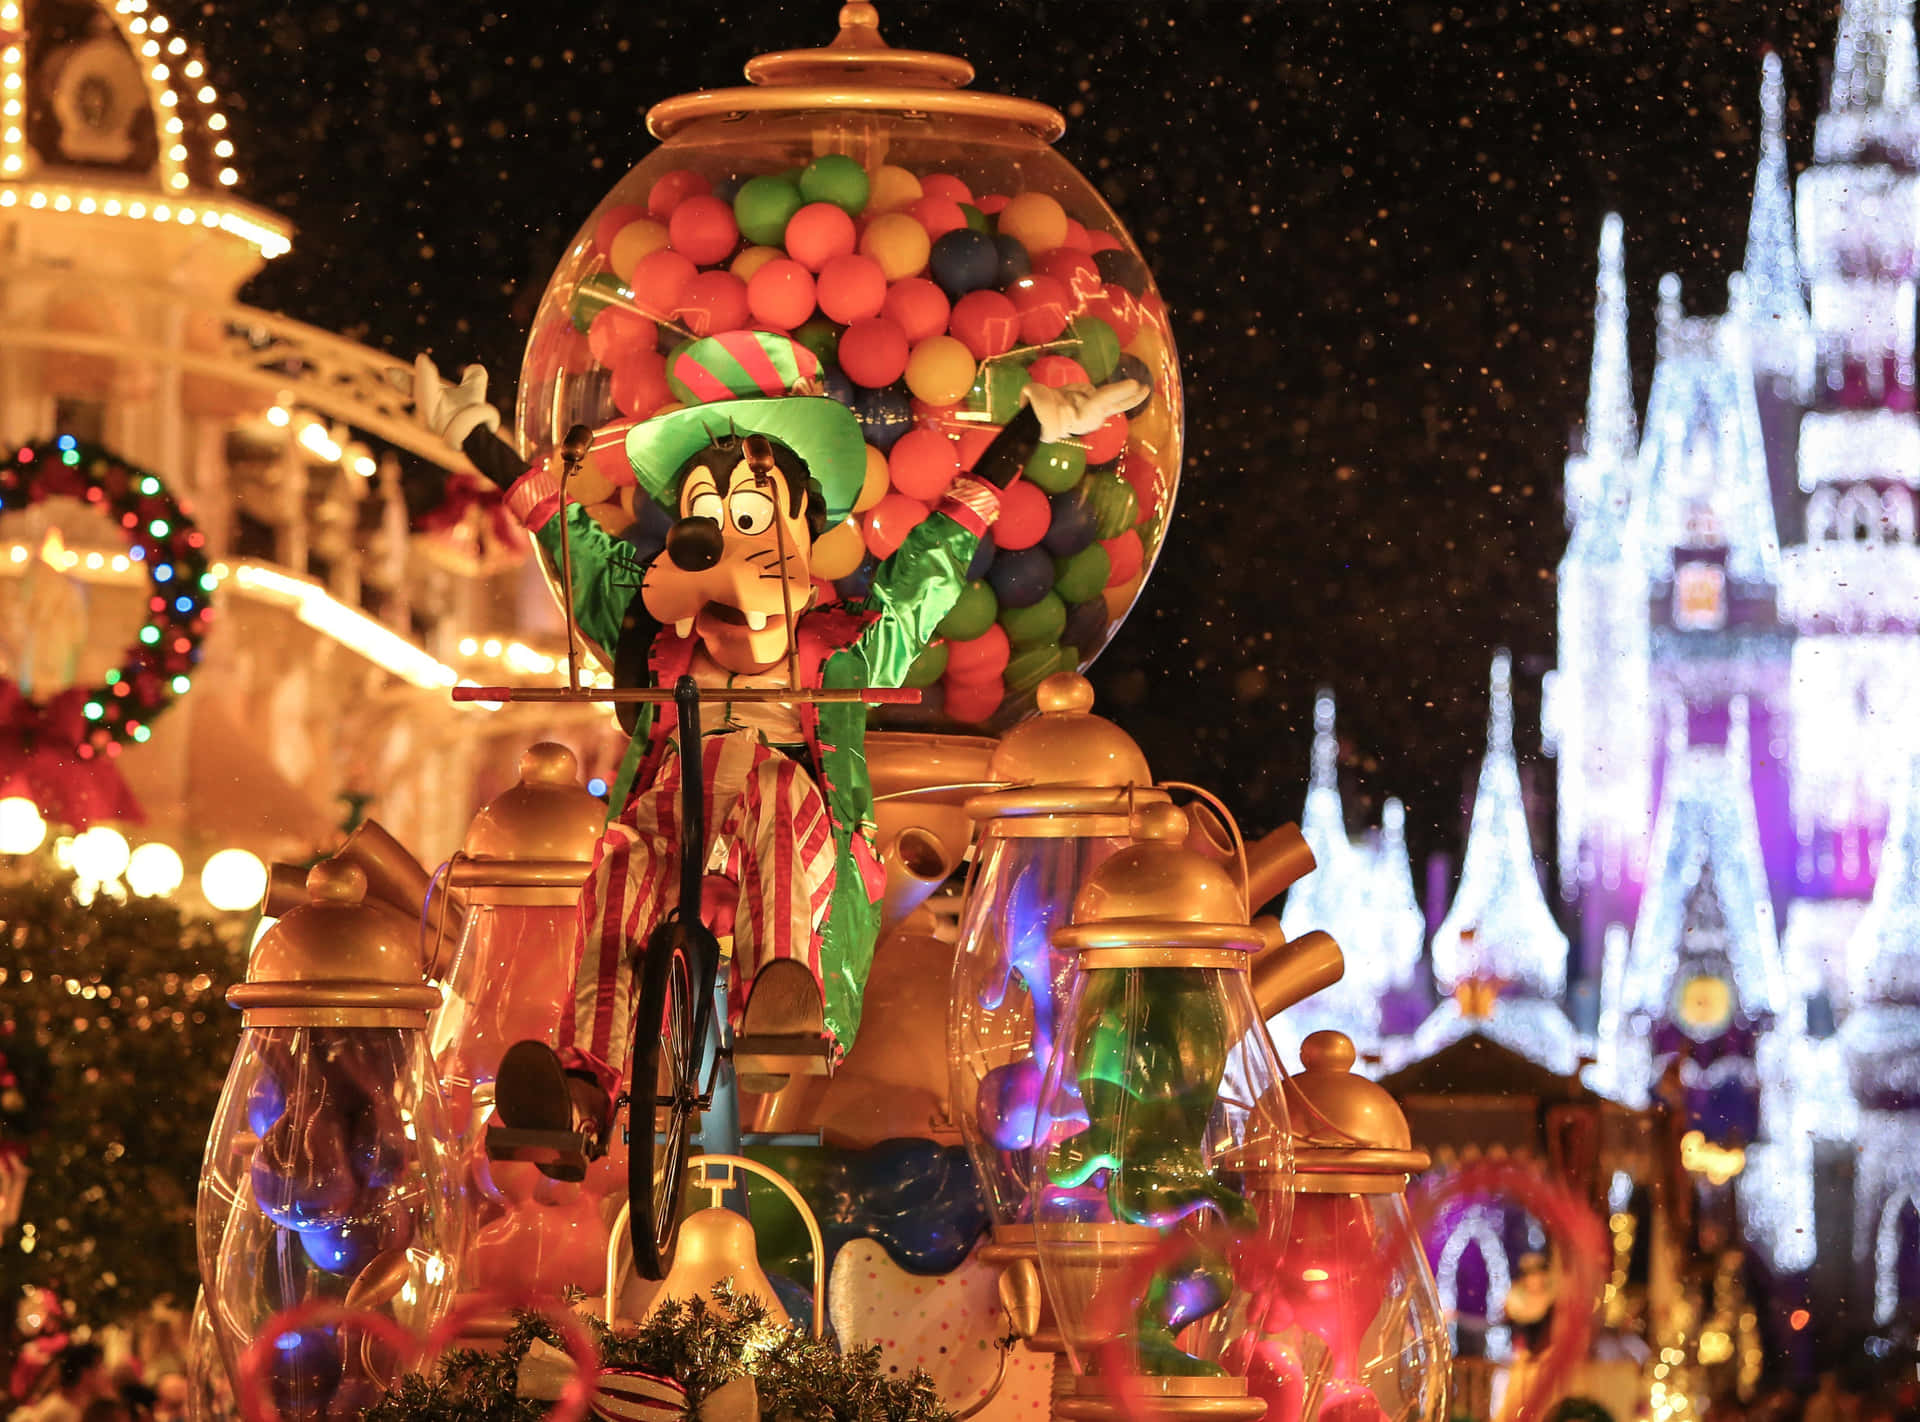 Magic Kingdom, Orlando: A visit to the happiest place on earth